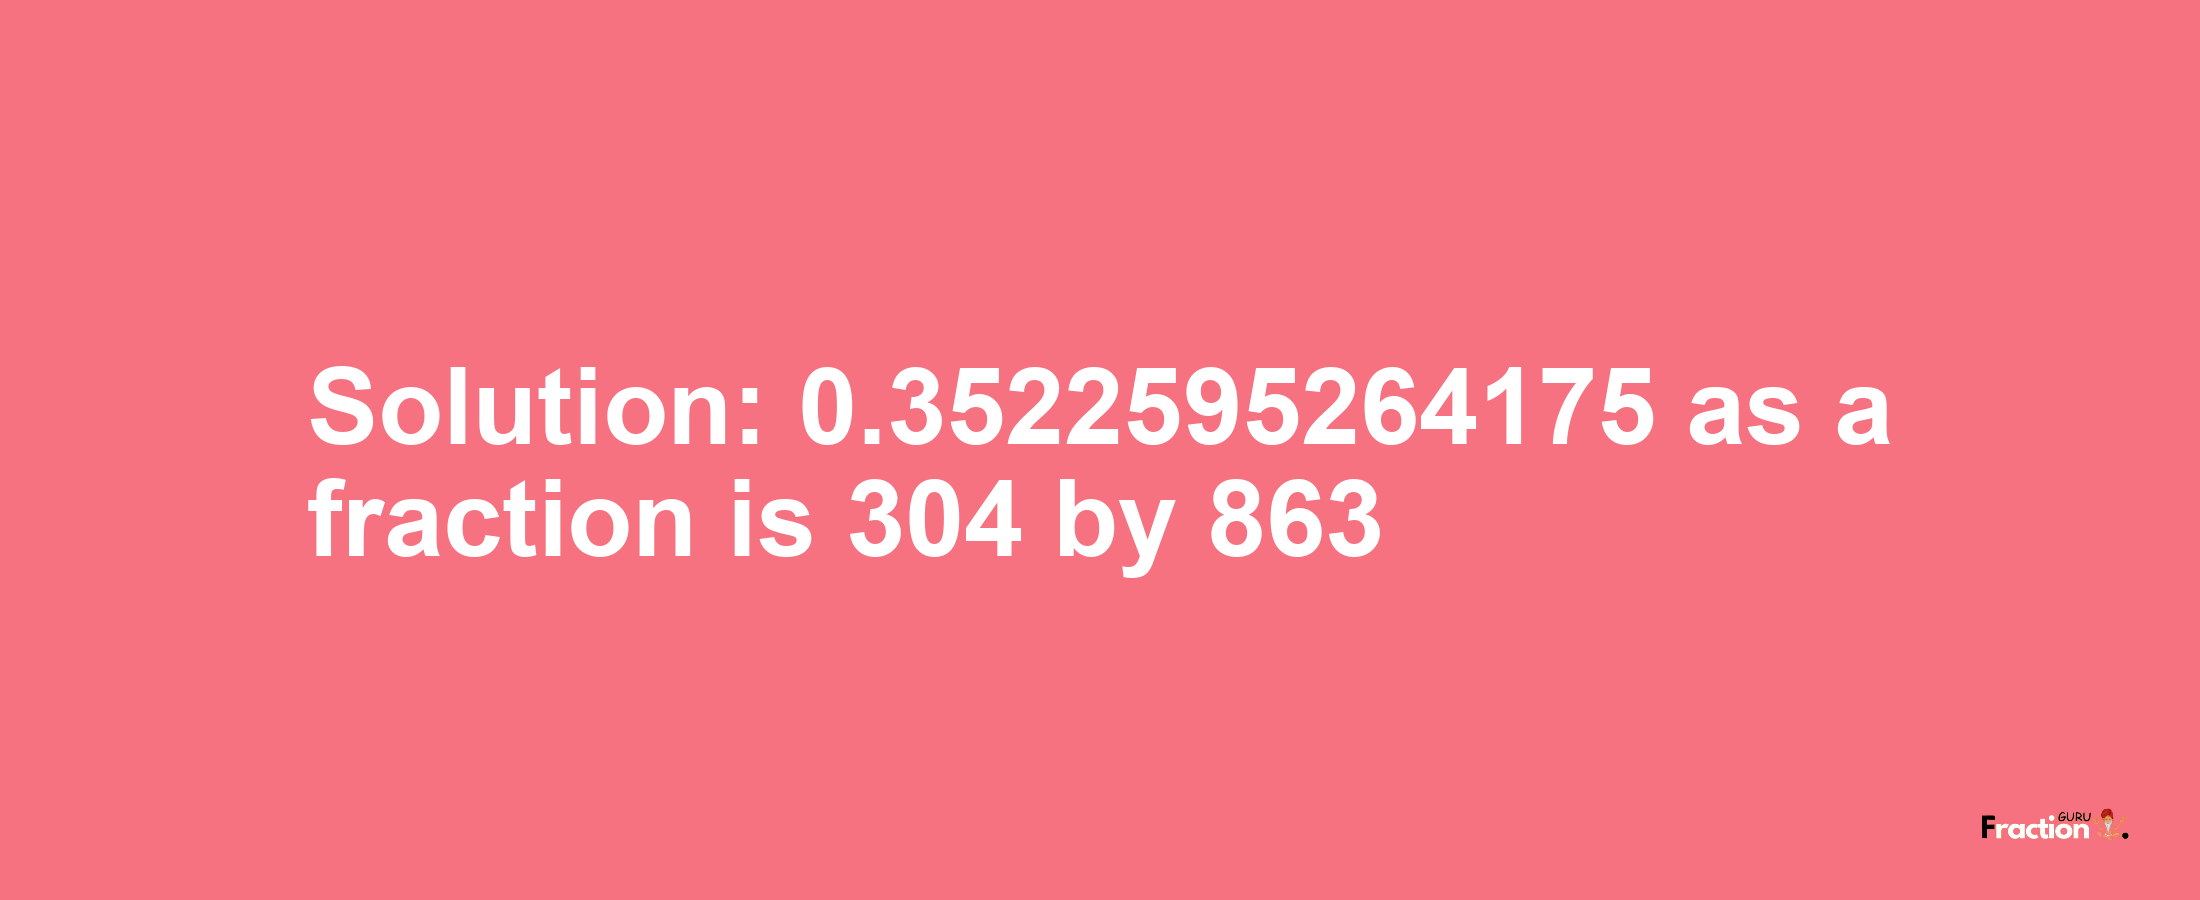 Solution:0.3522595264175 as a fraction is 304/863